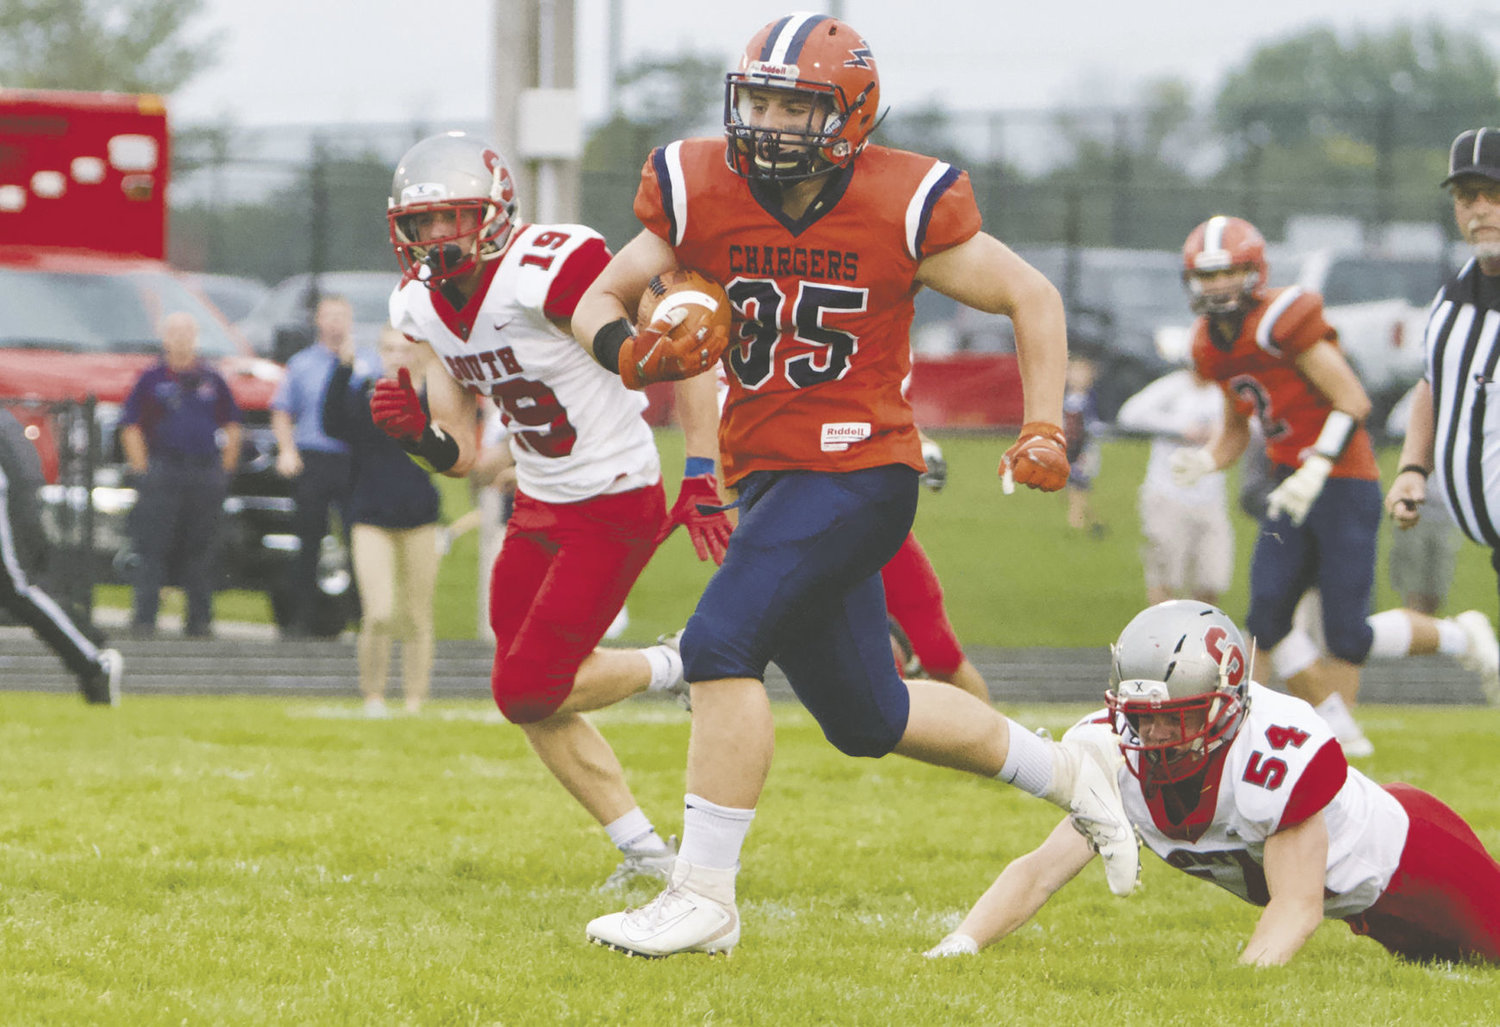 Jacob Braun had a long rush and scored a defensive touchdown for the Chargers in their win over the Mounties.